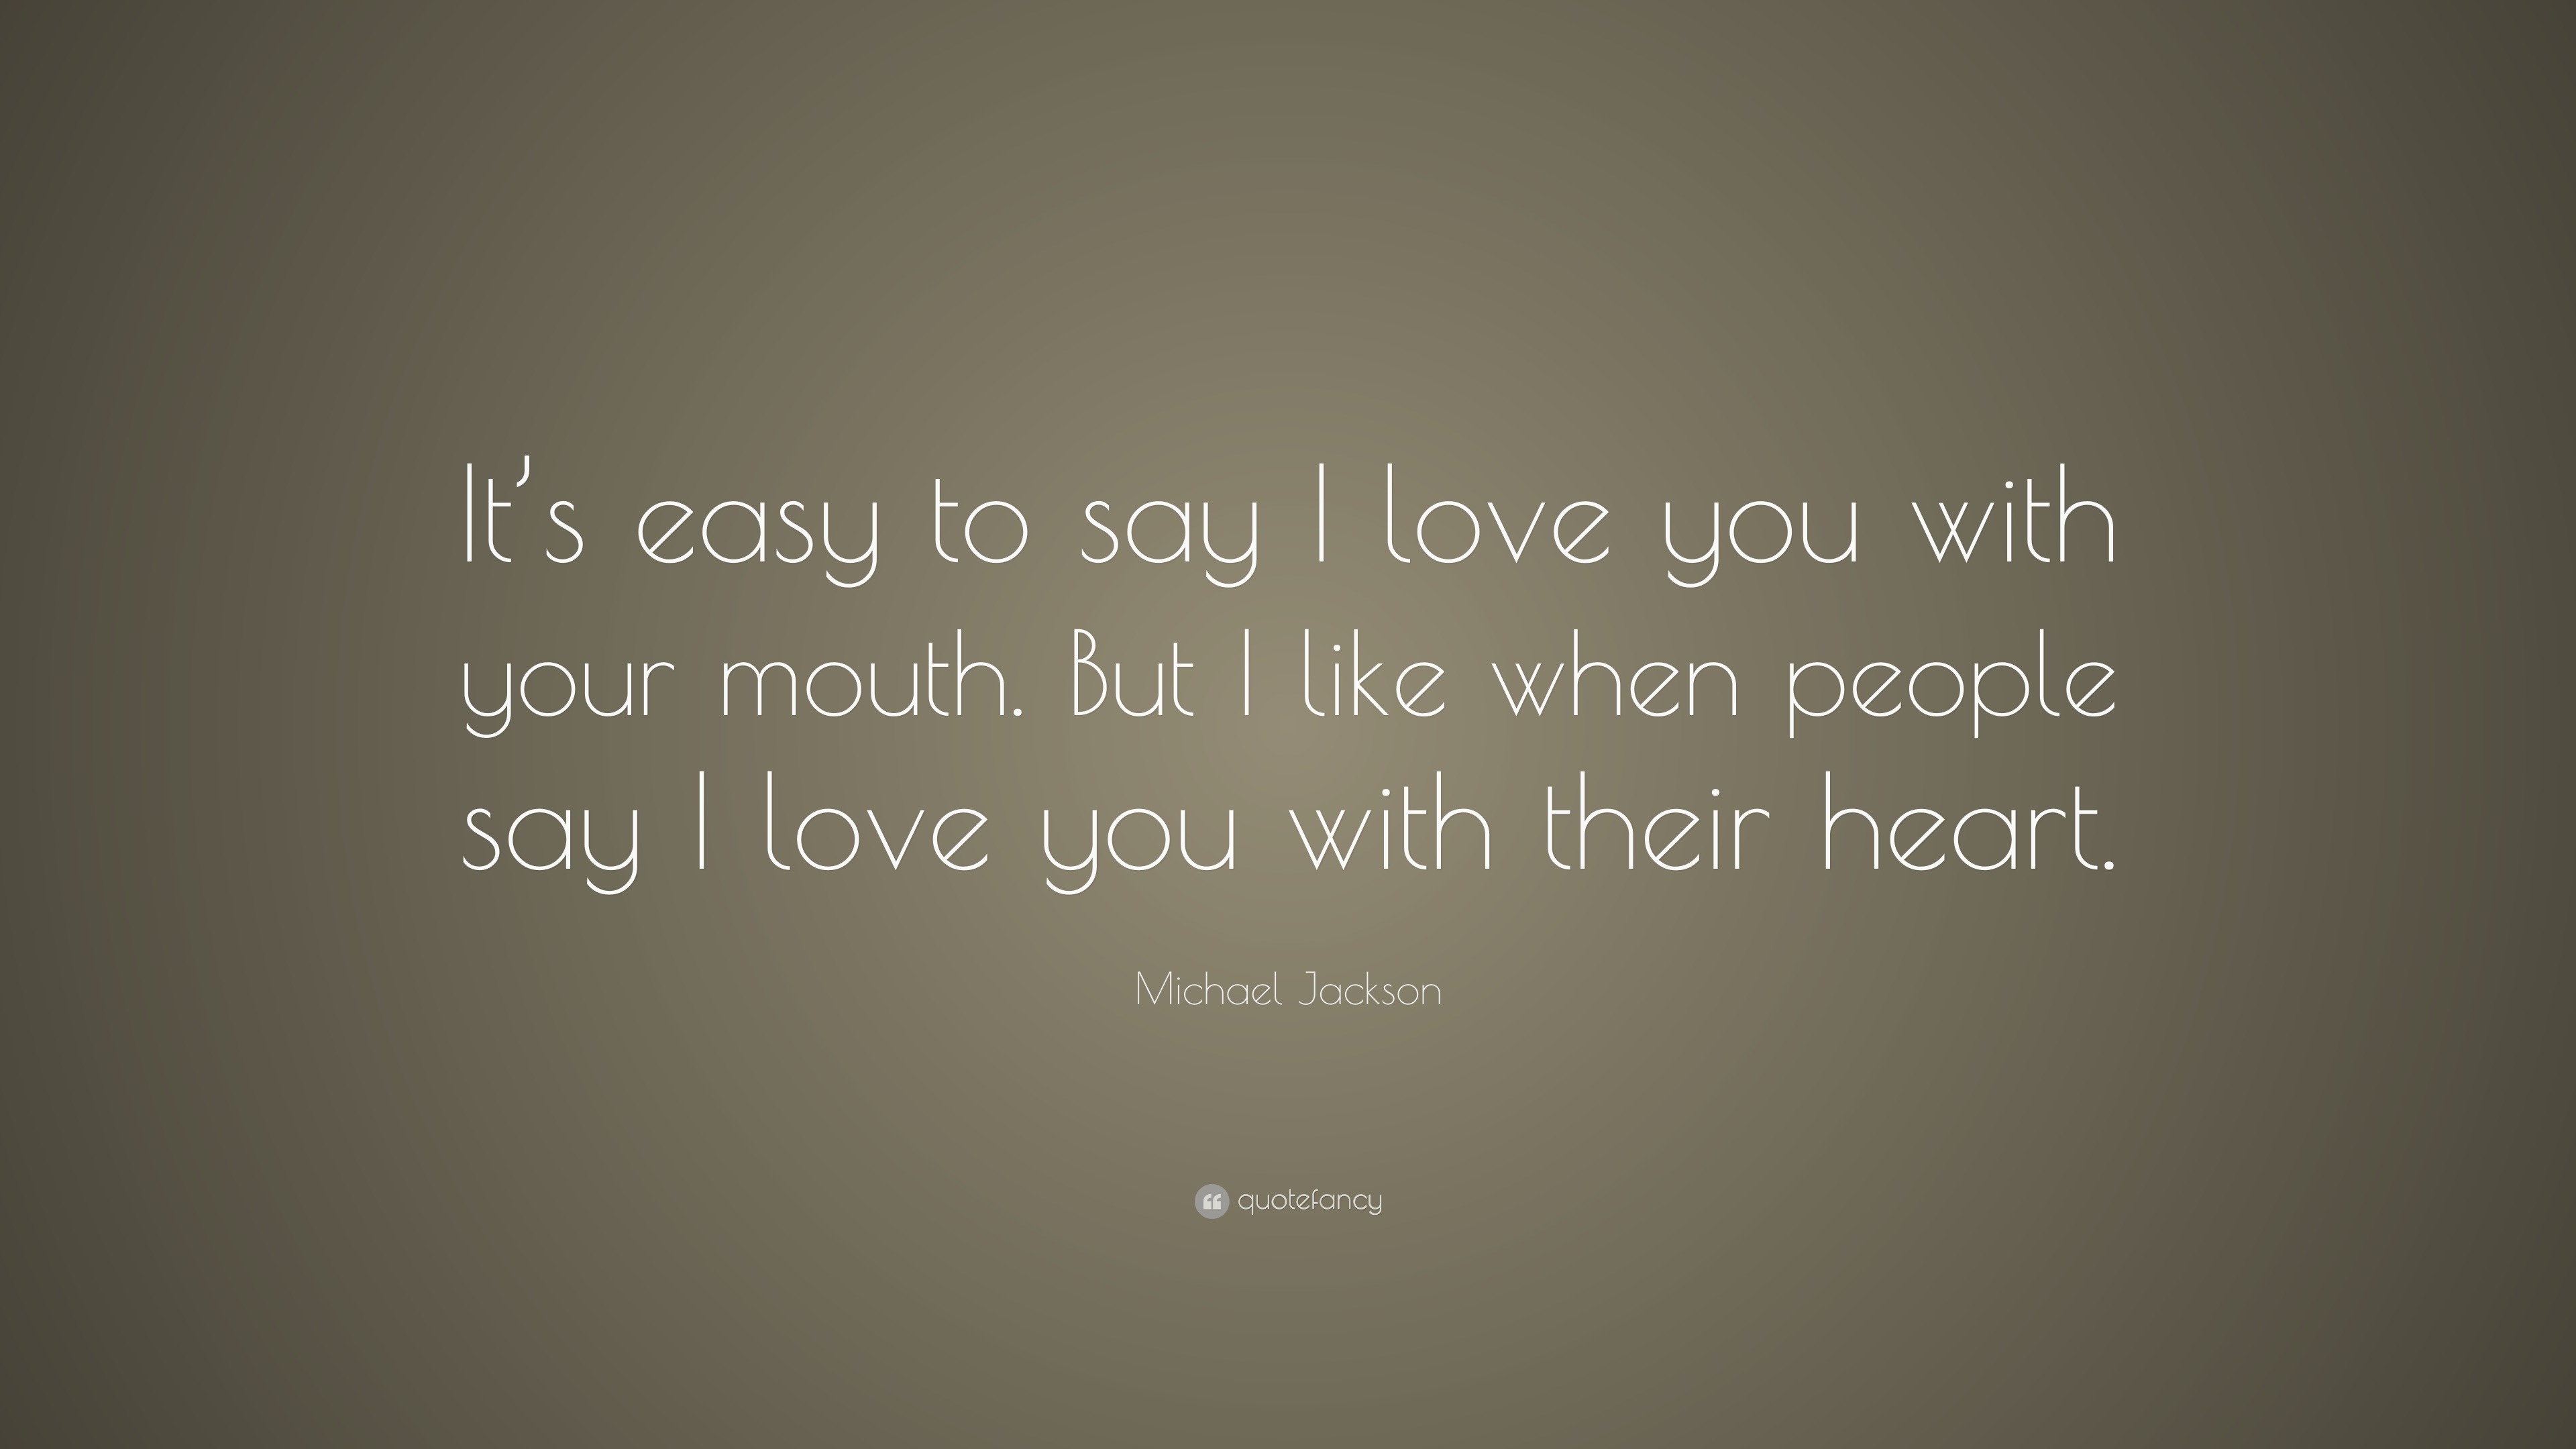 michael quote u201cit u0027s easy say i love you with your